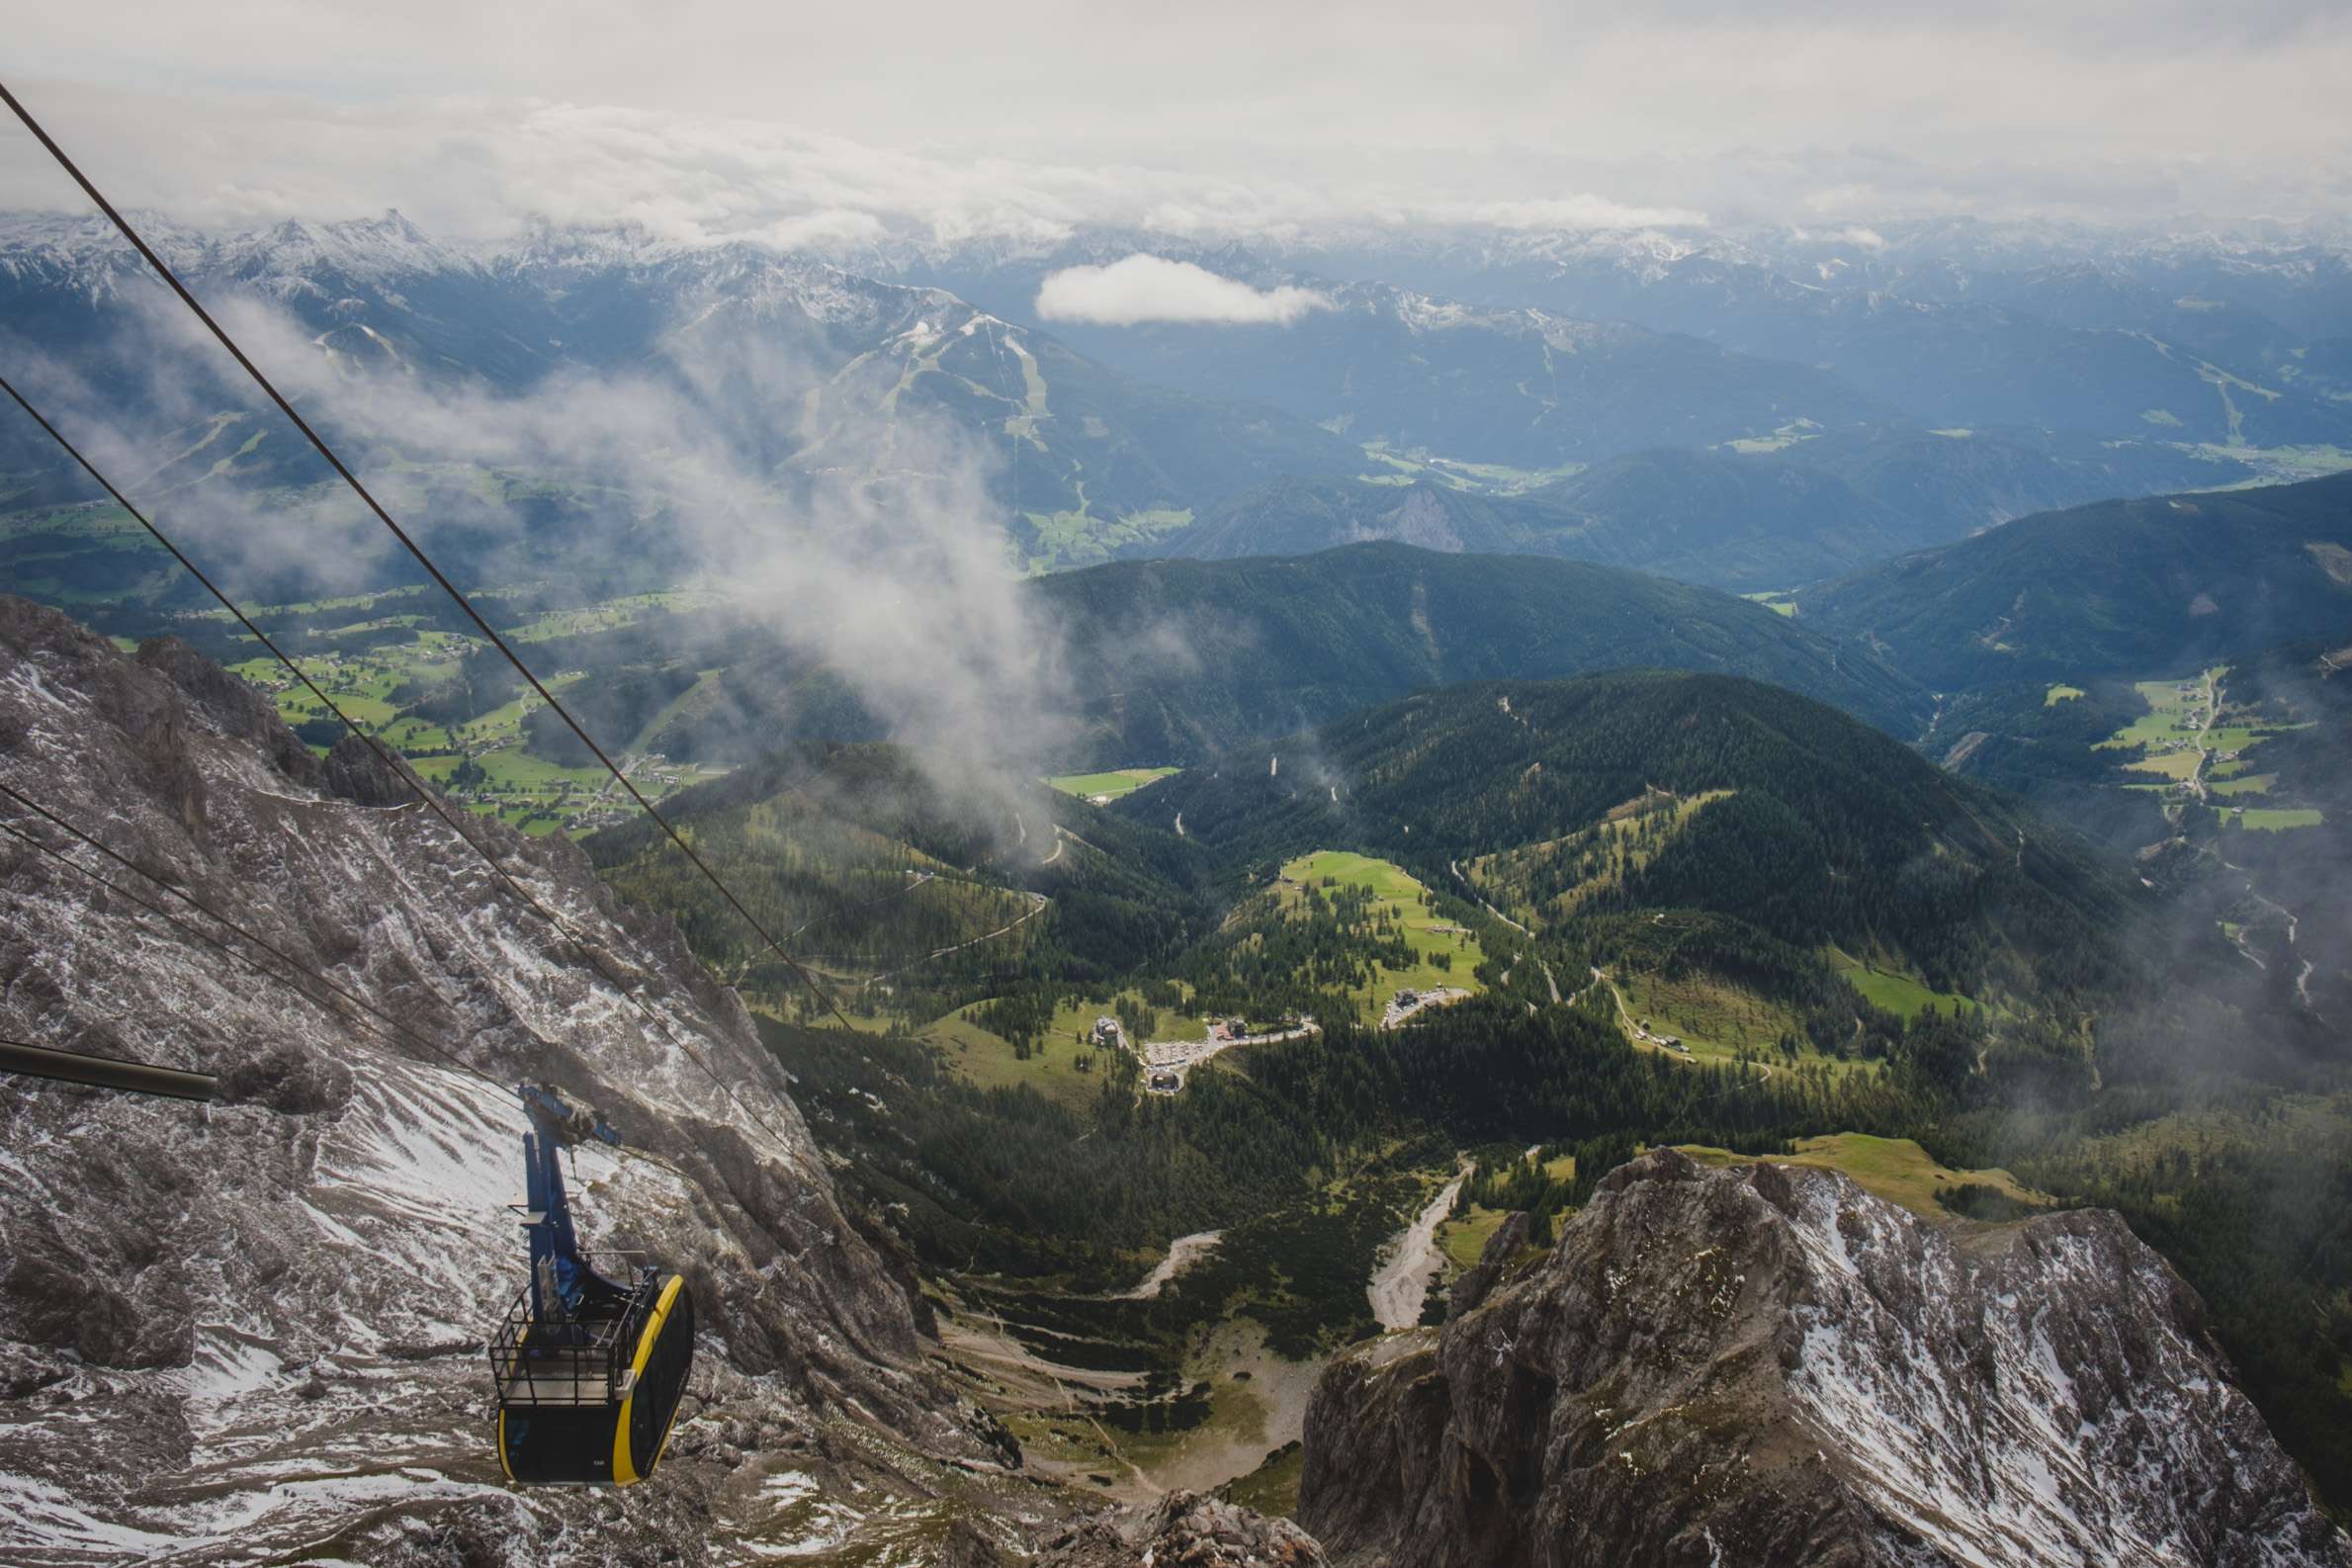 View from the top cable car station of Dachstein